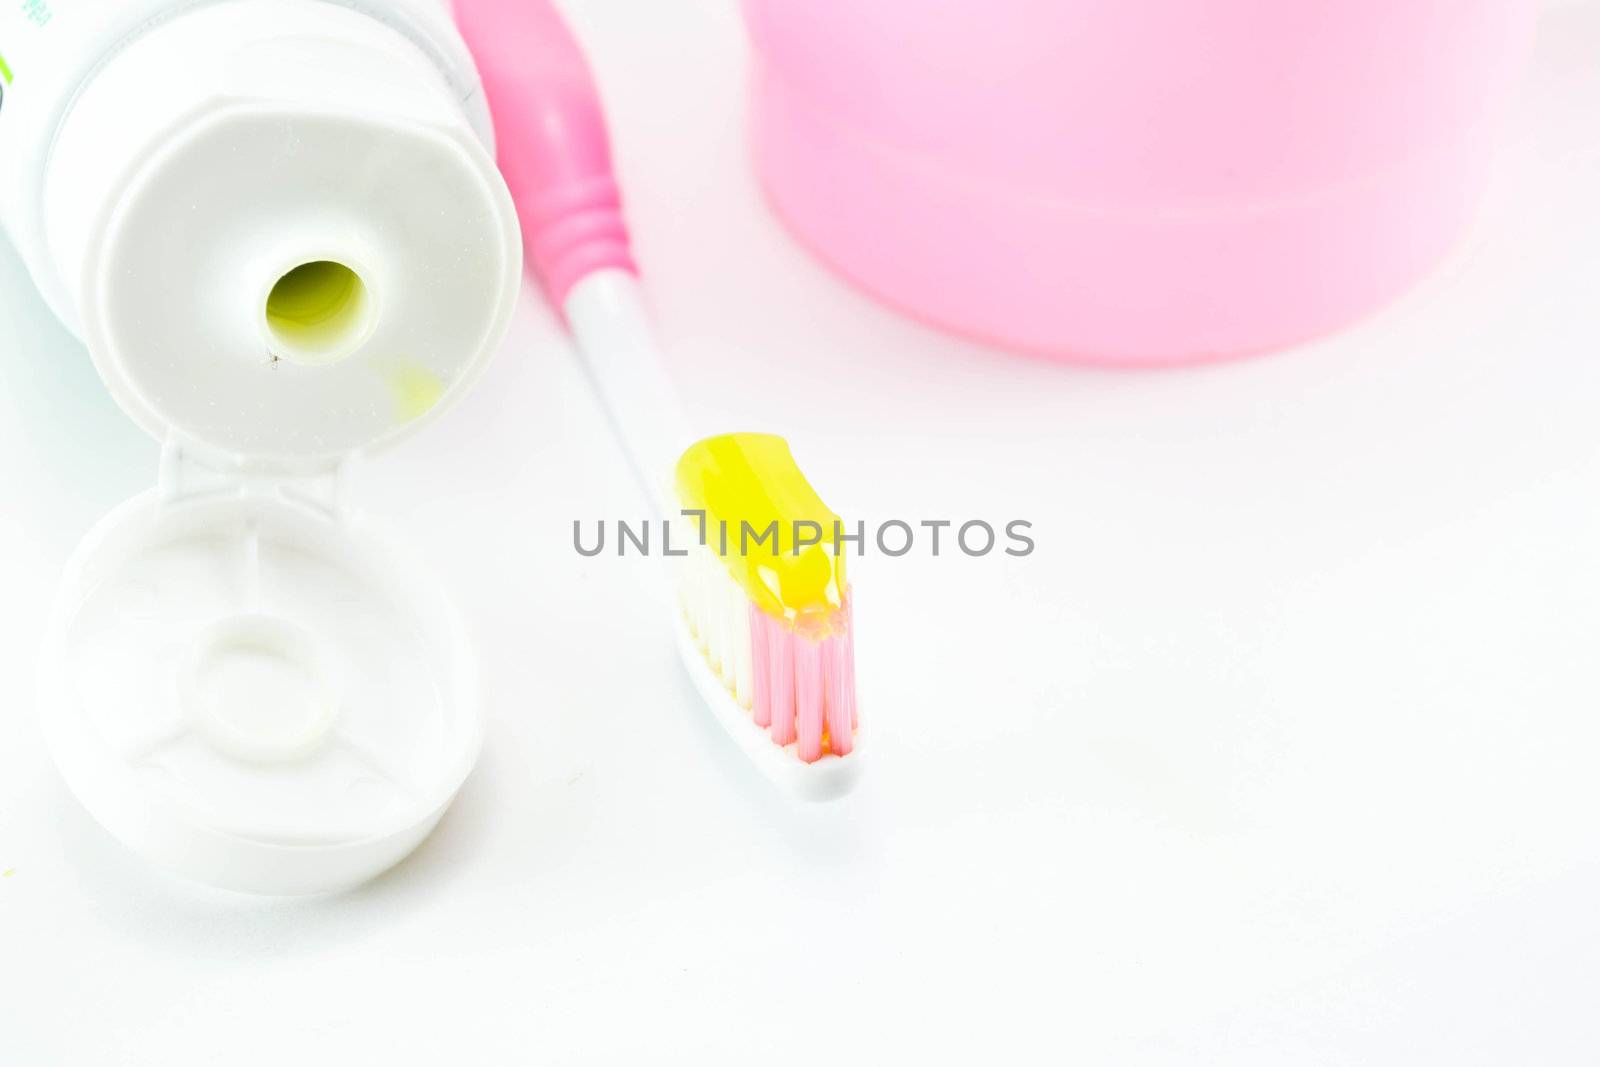 Toothbrush and toothpaste on white background by Thanamat